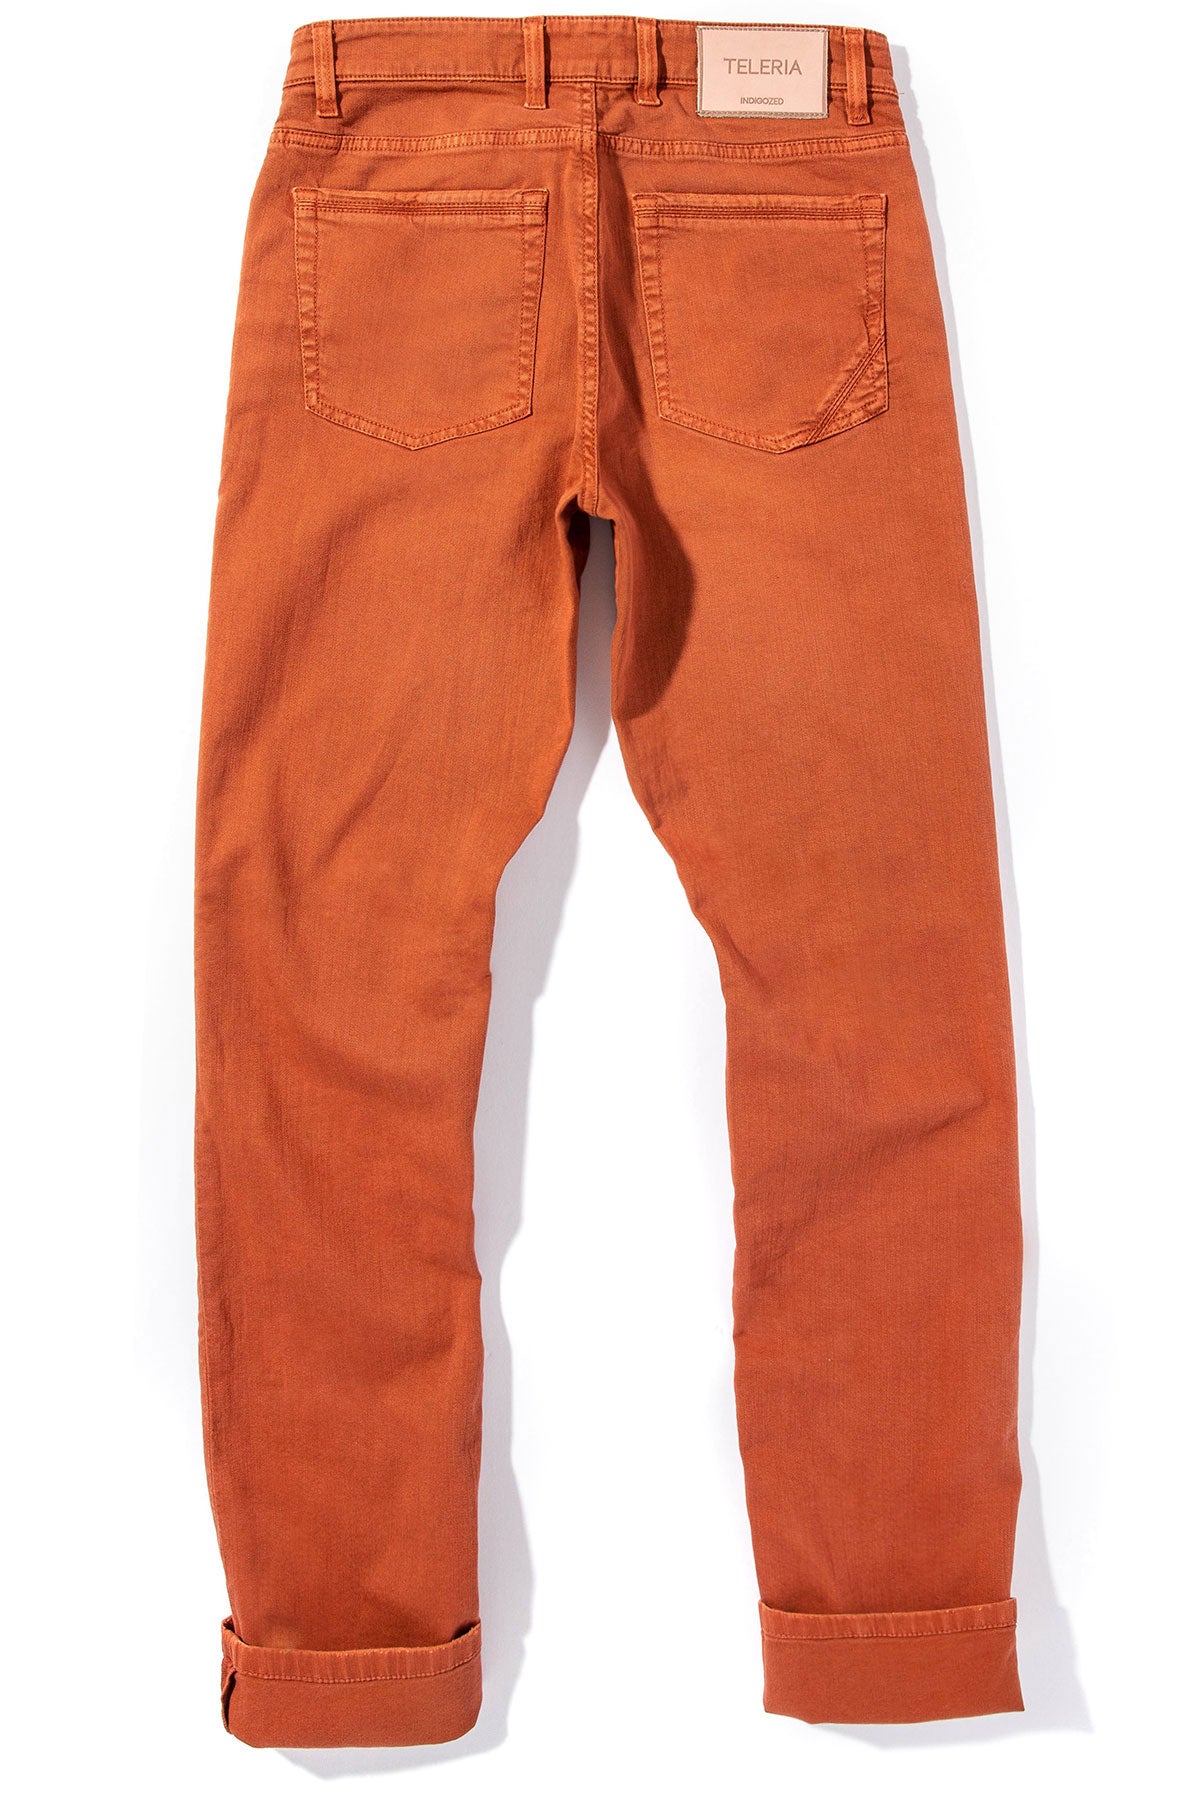 Ouray 5-Pocket Stretch Twill in Coccio | Mens - Pants - 5 Pocket | Teleria Zed